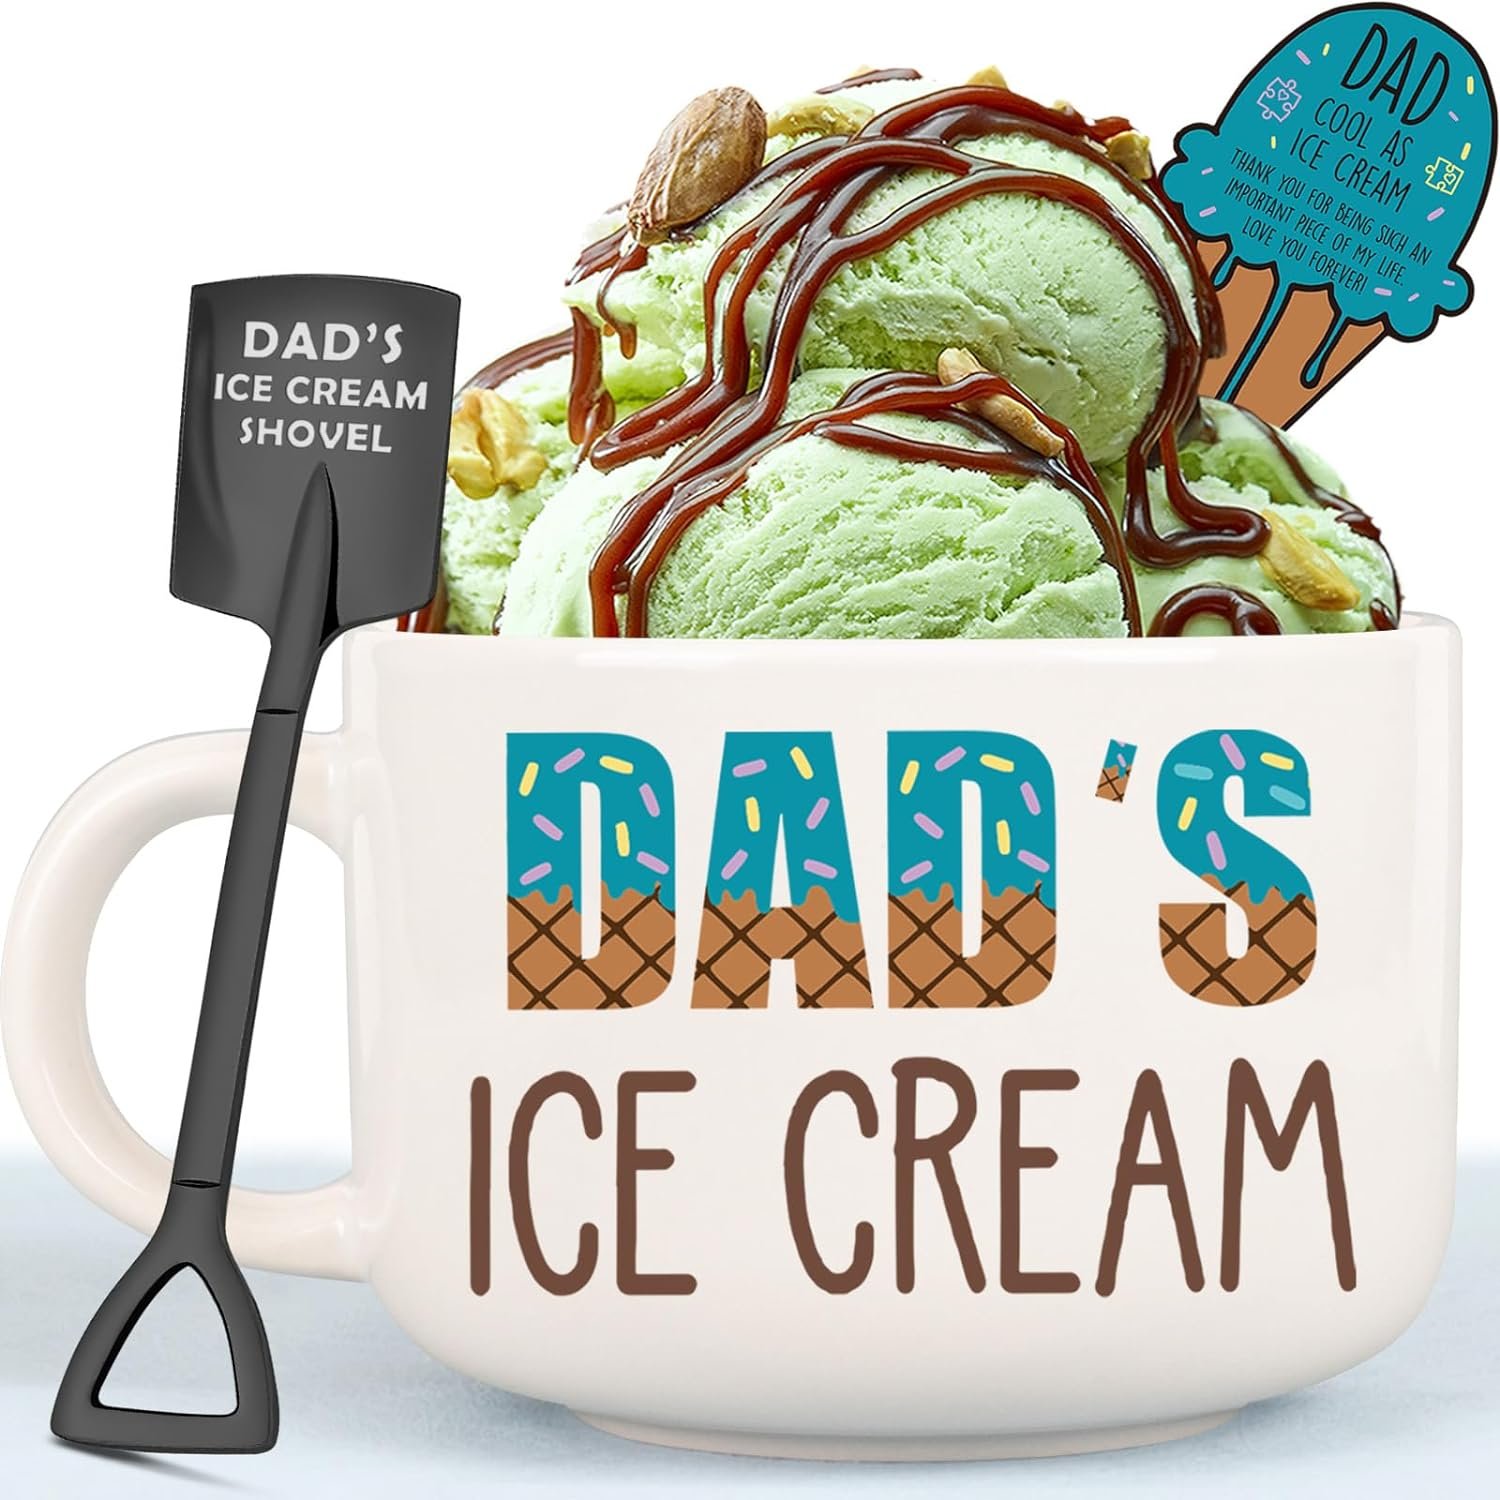 BackURyear Dad Birthday Gifts, Dad Gifts from Daughter Son, Fathers Day Gift for Dad, Ice Cream Lovers Gifts for Dad, Christmas New Year Gifts Box for Dad, Dads Bowl with Shovel Spoon Set Gifts